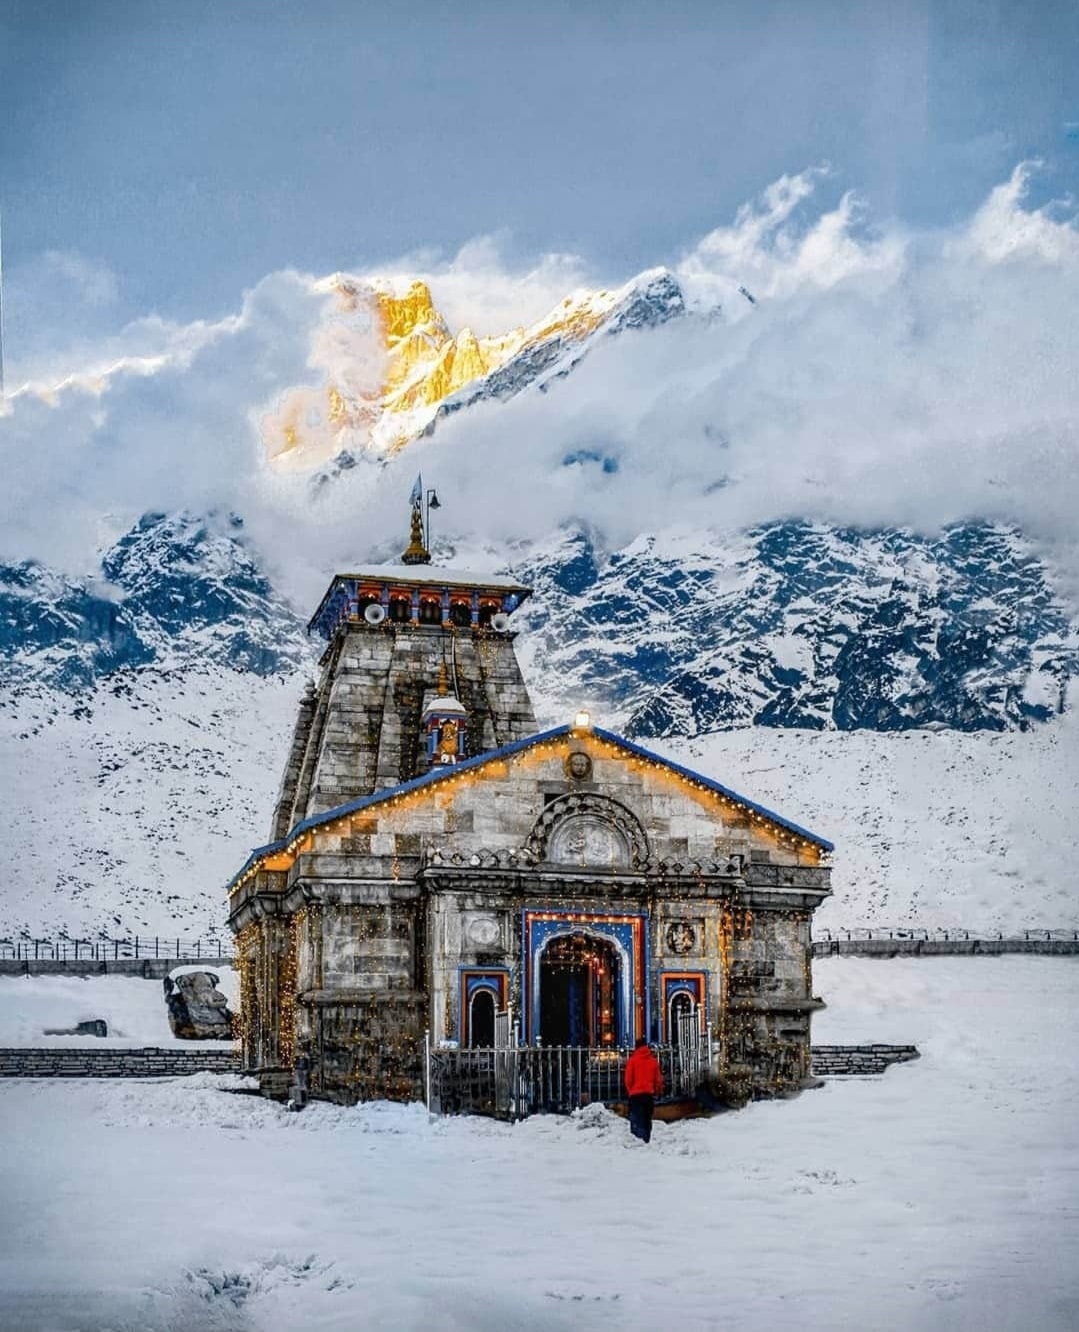 Dr pm dhakate on kedarnath temple facts built by using the most advanced architecture principles of ancient times said to be under snow for years from approx